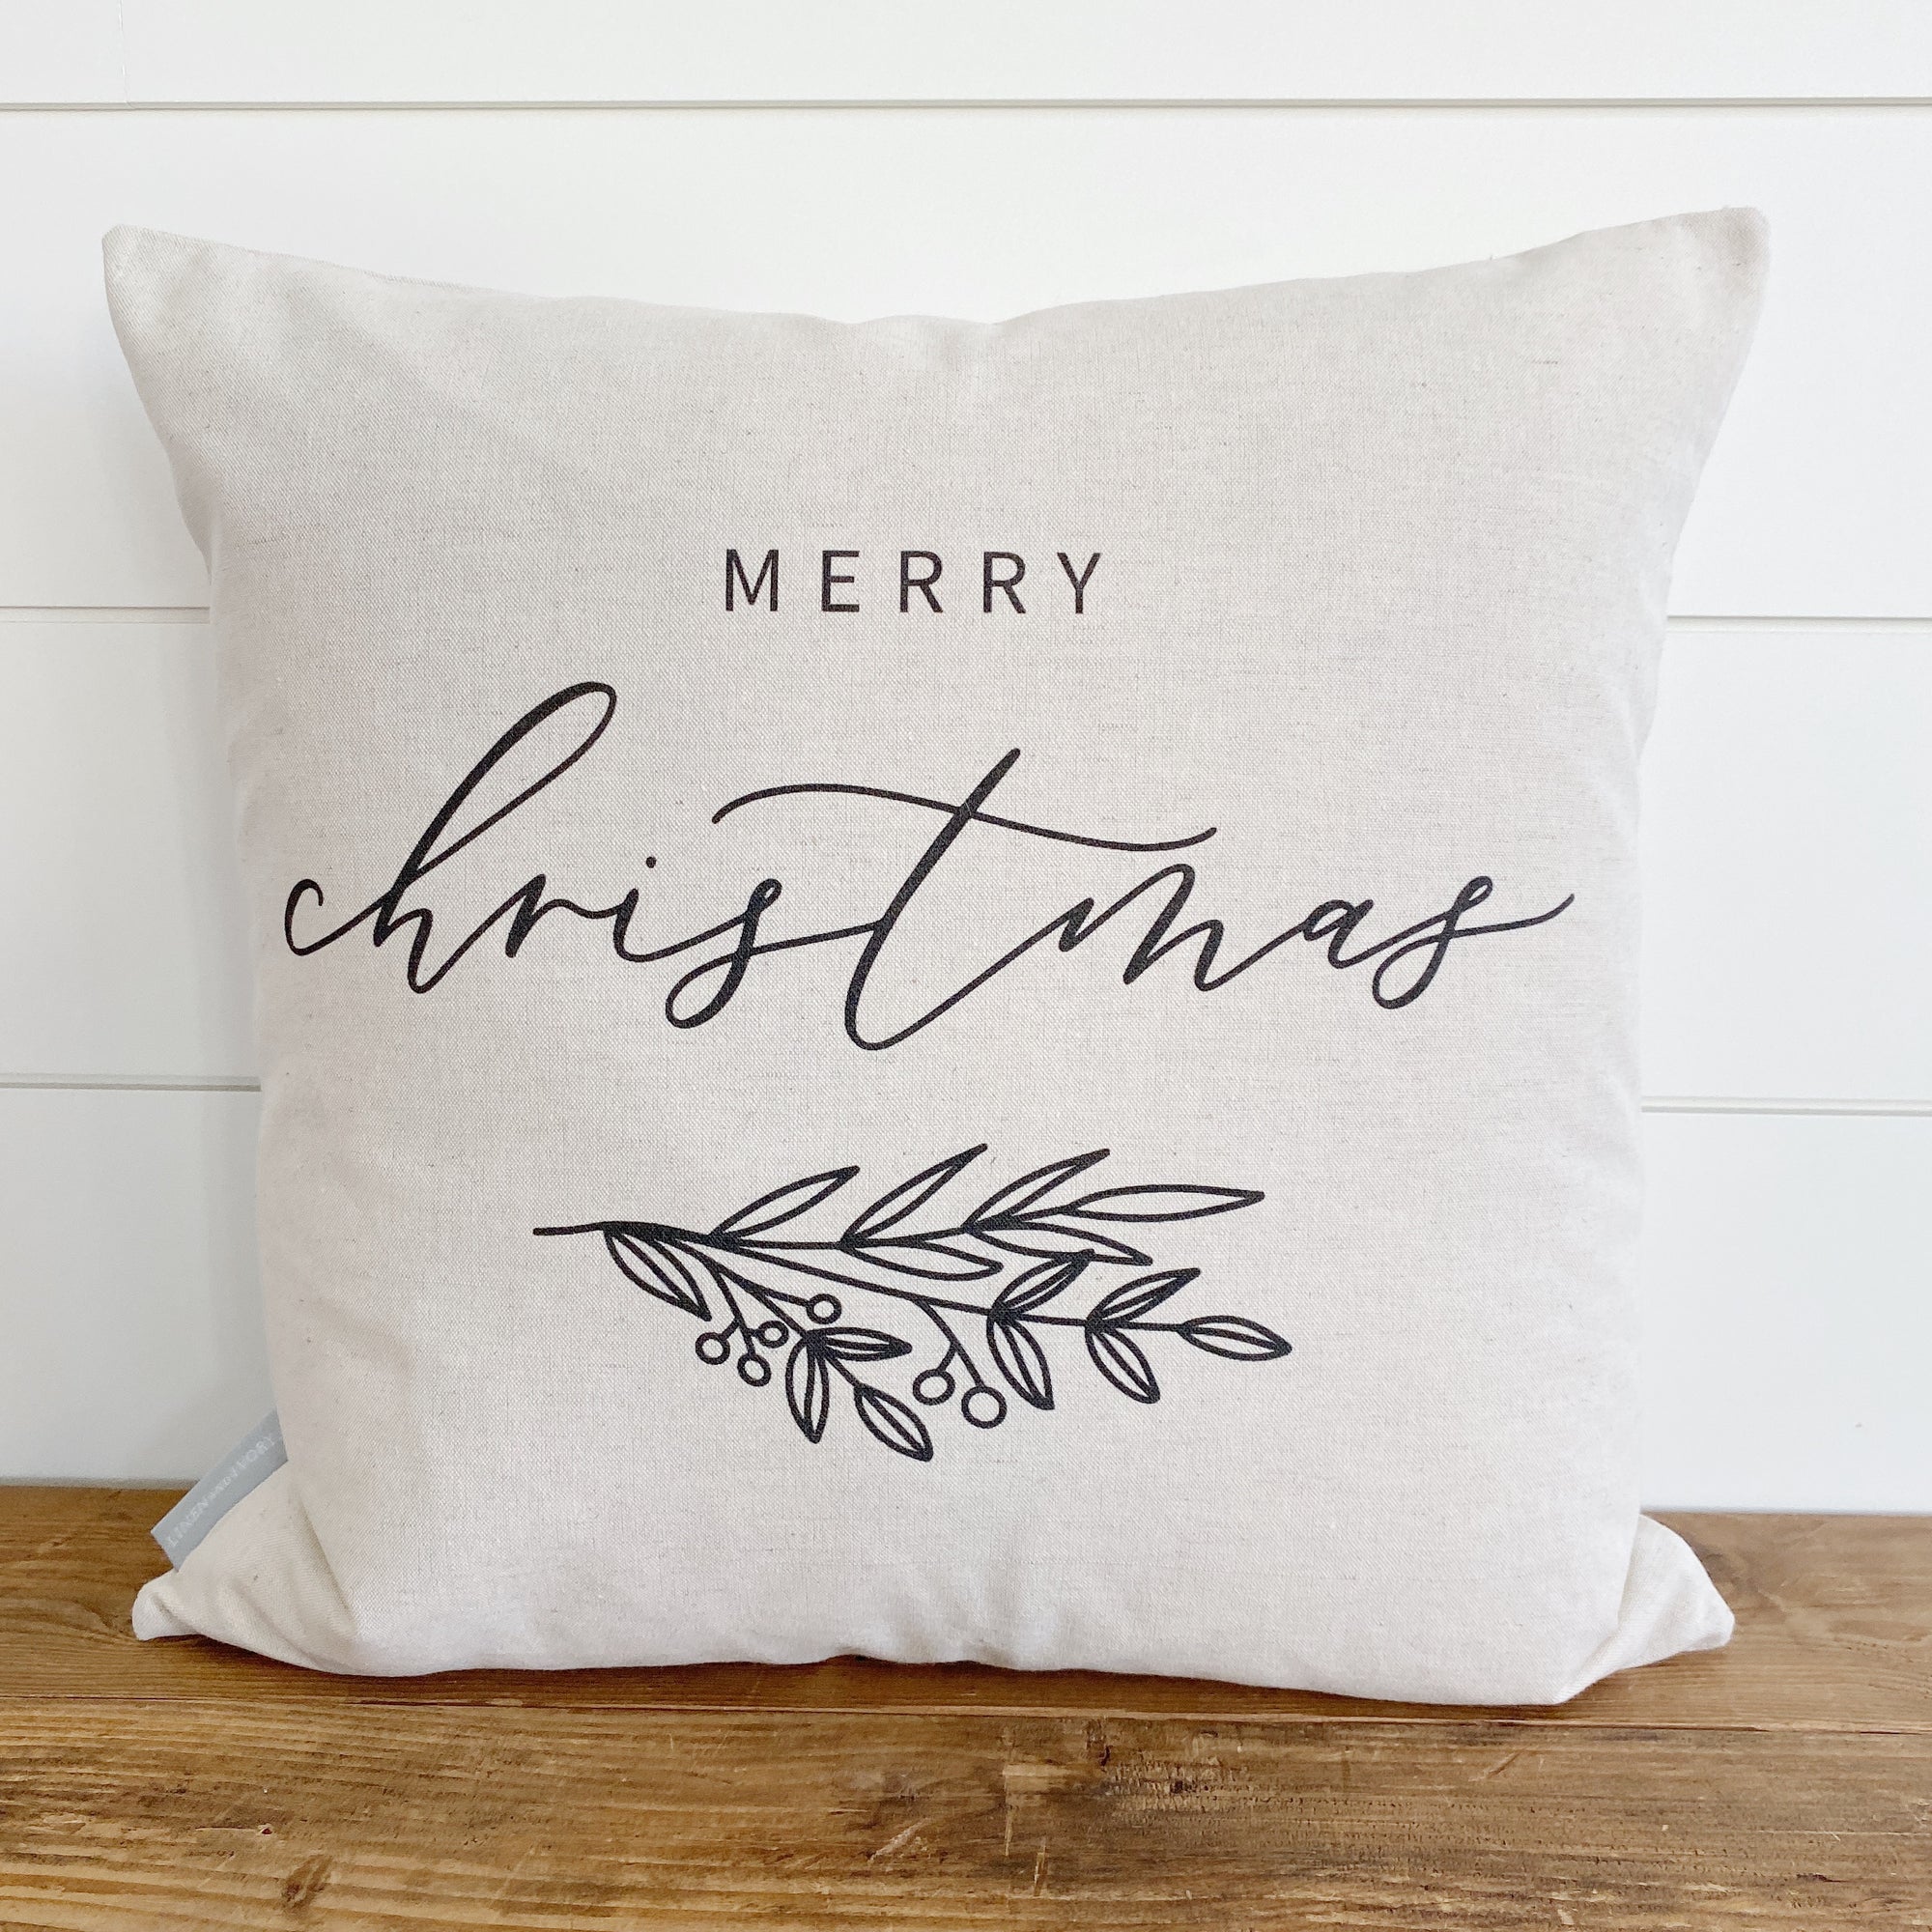 Merry Christmas Calligraphy Pillow Cover - Linen and Ivory